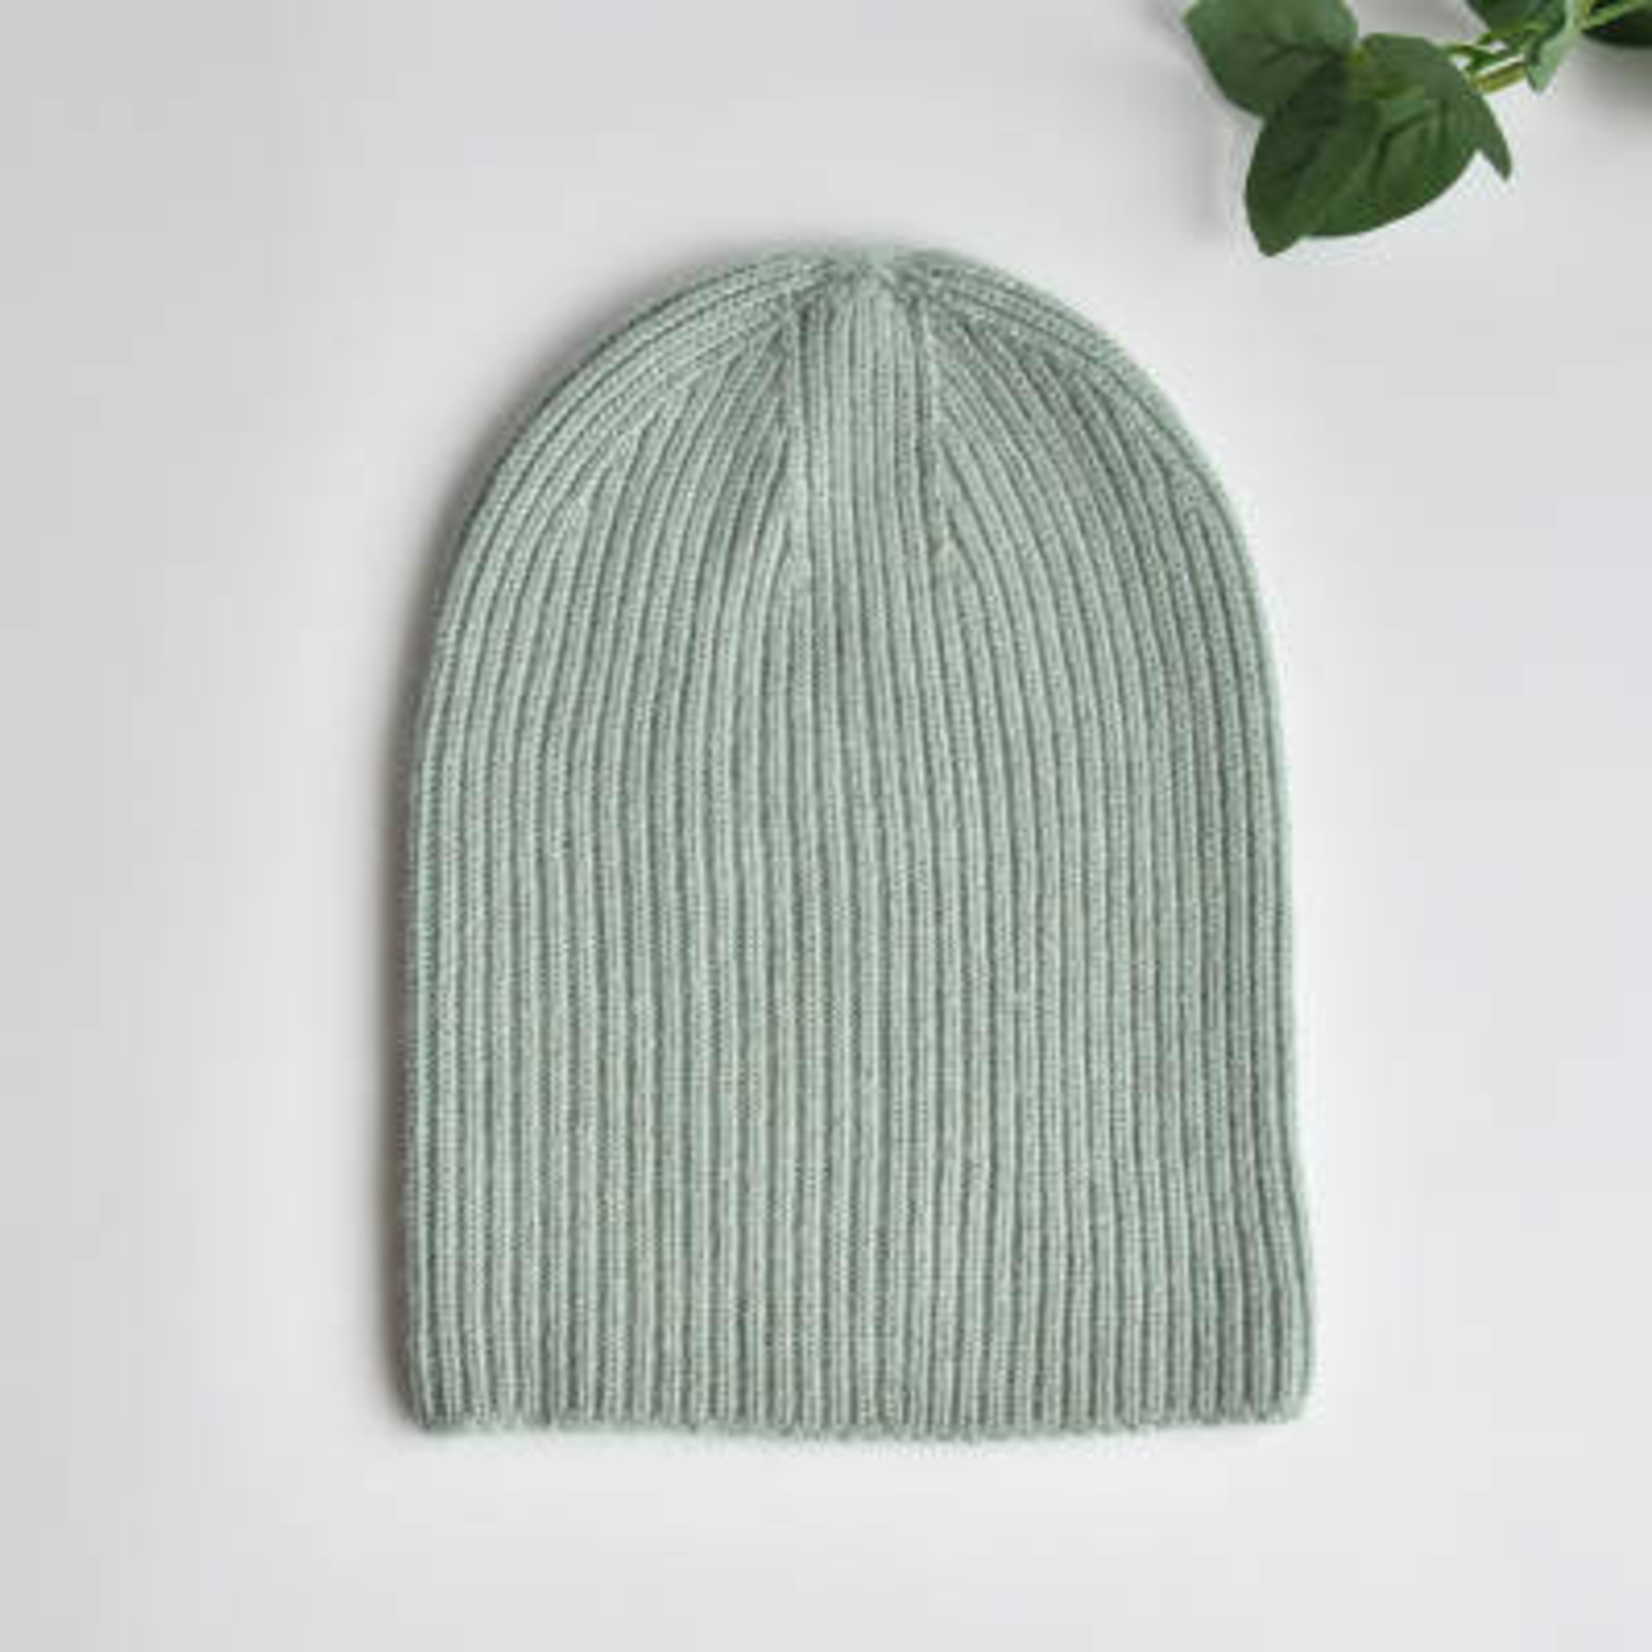 The Pathz Cashmere & Wool Blend 3-in-1 Beanies